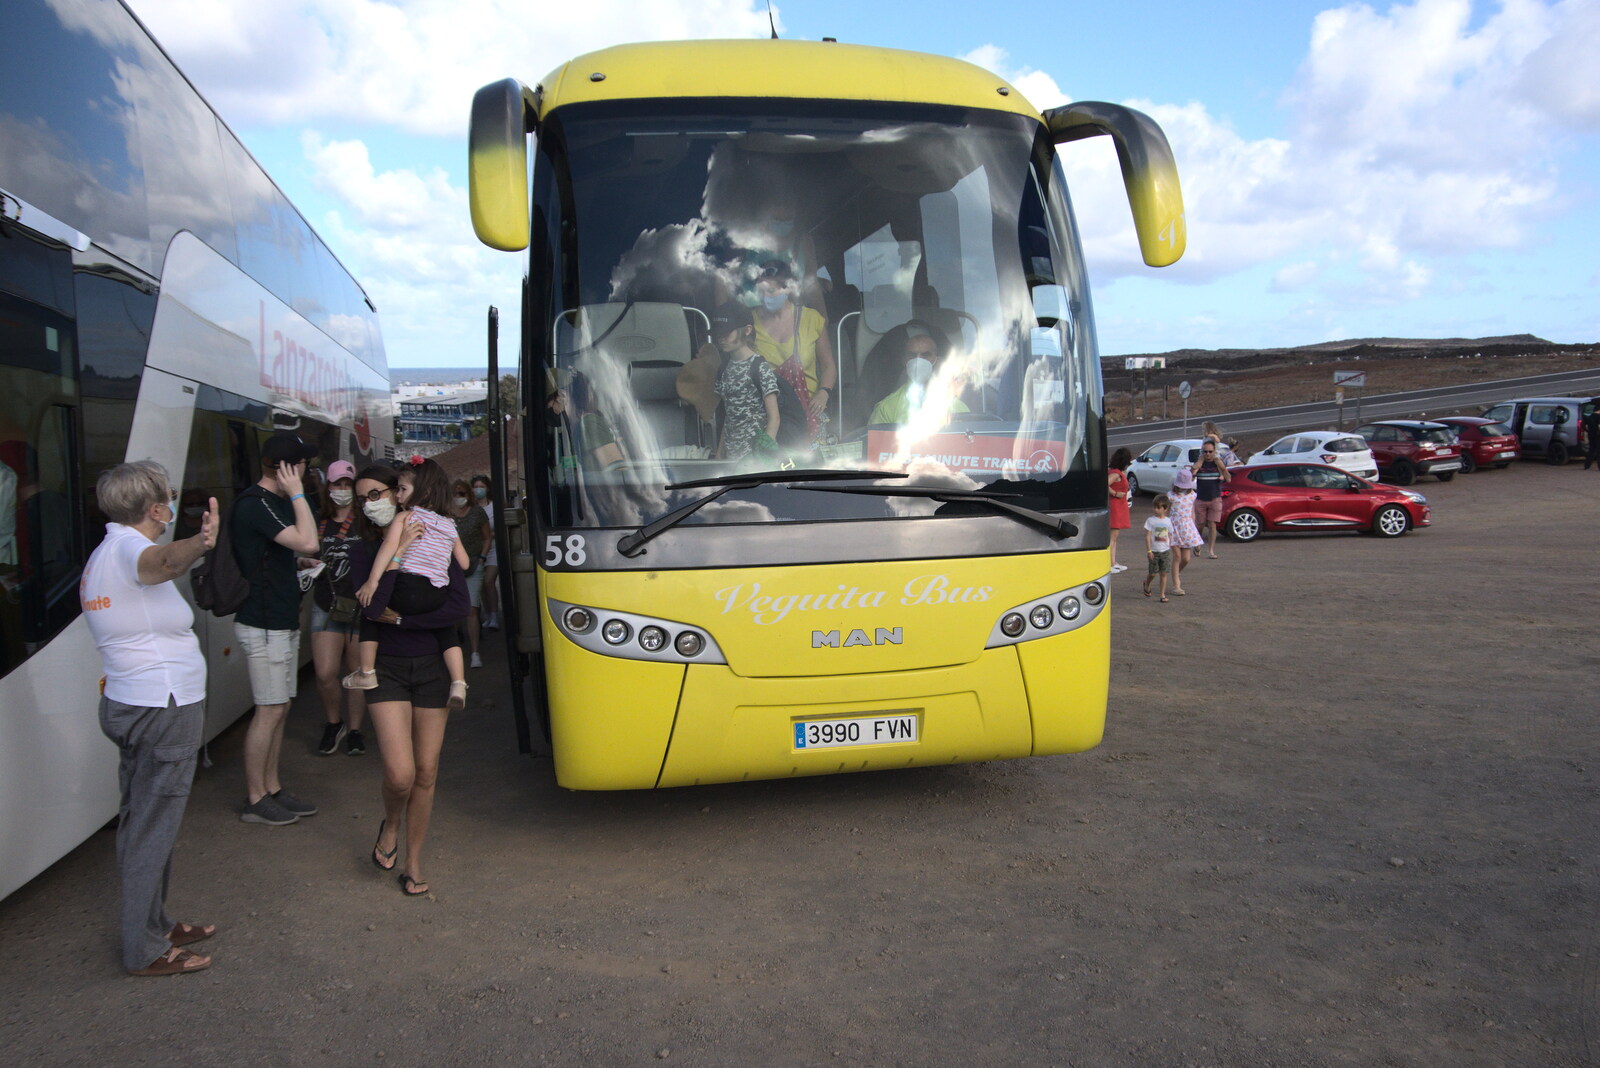 Our insectoid tour bus from The Volcanoes of Lanzarote, Canary Islands, Spain - 27th October 2021